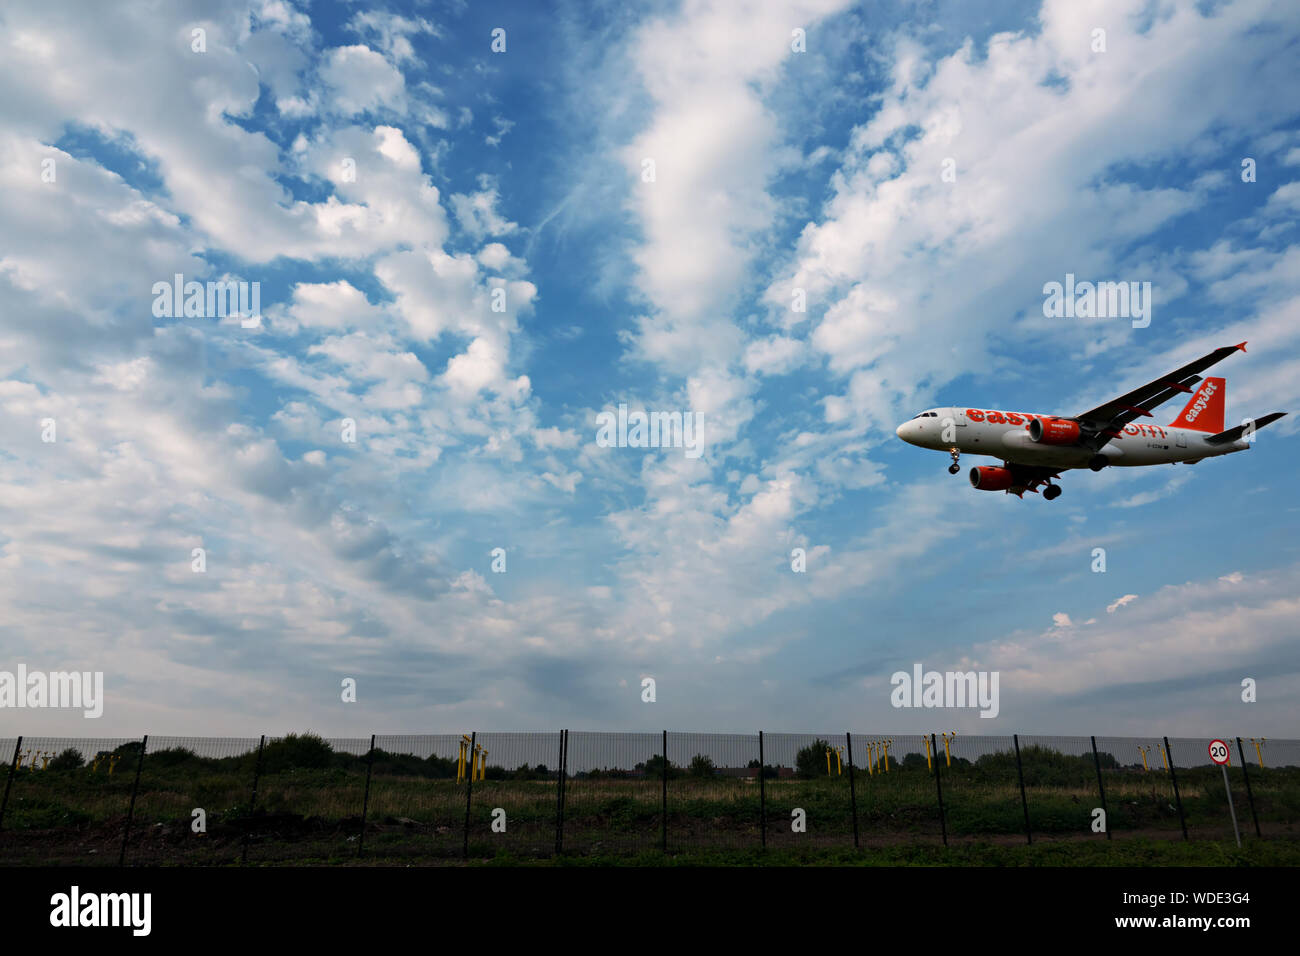 An Easyjet plane coming in to land at Liverpool John Lennon airport Stock Photo